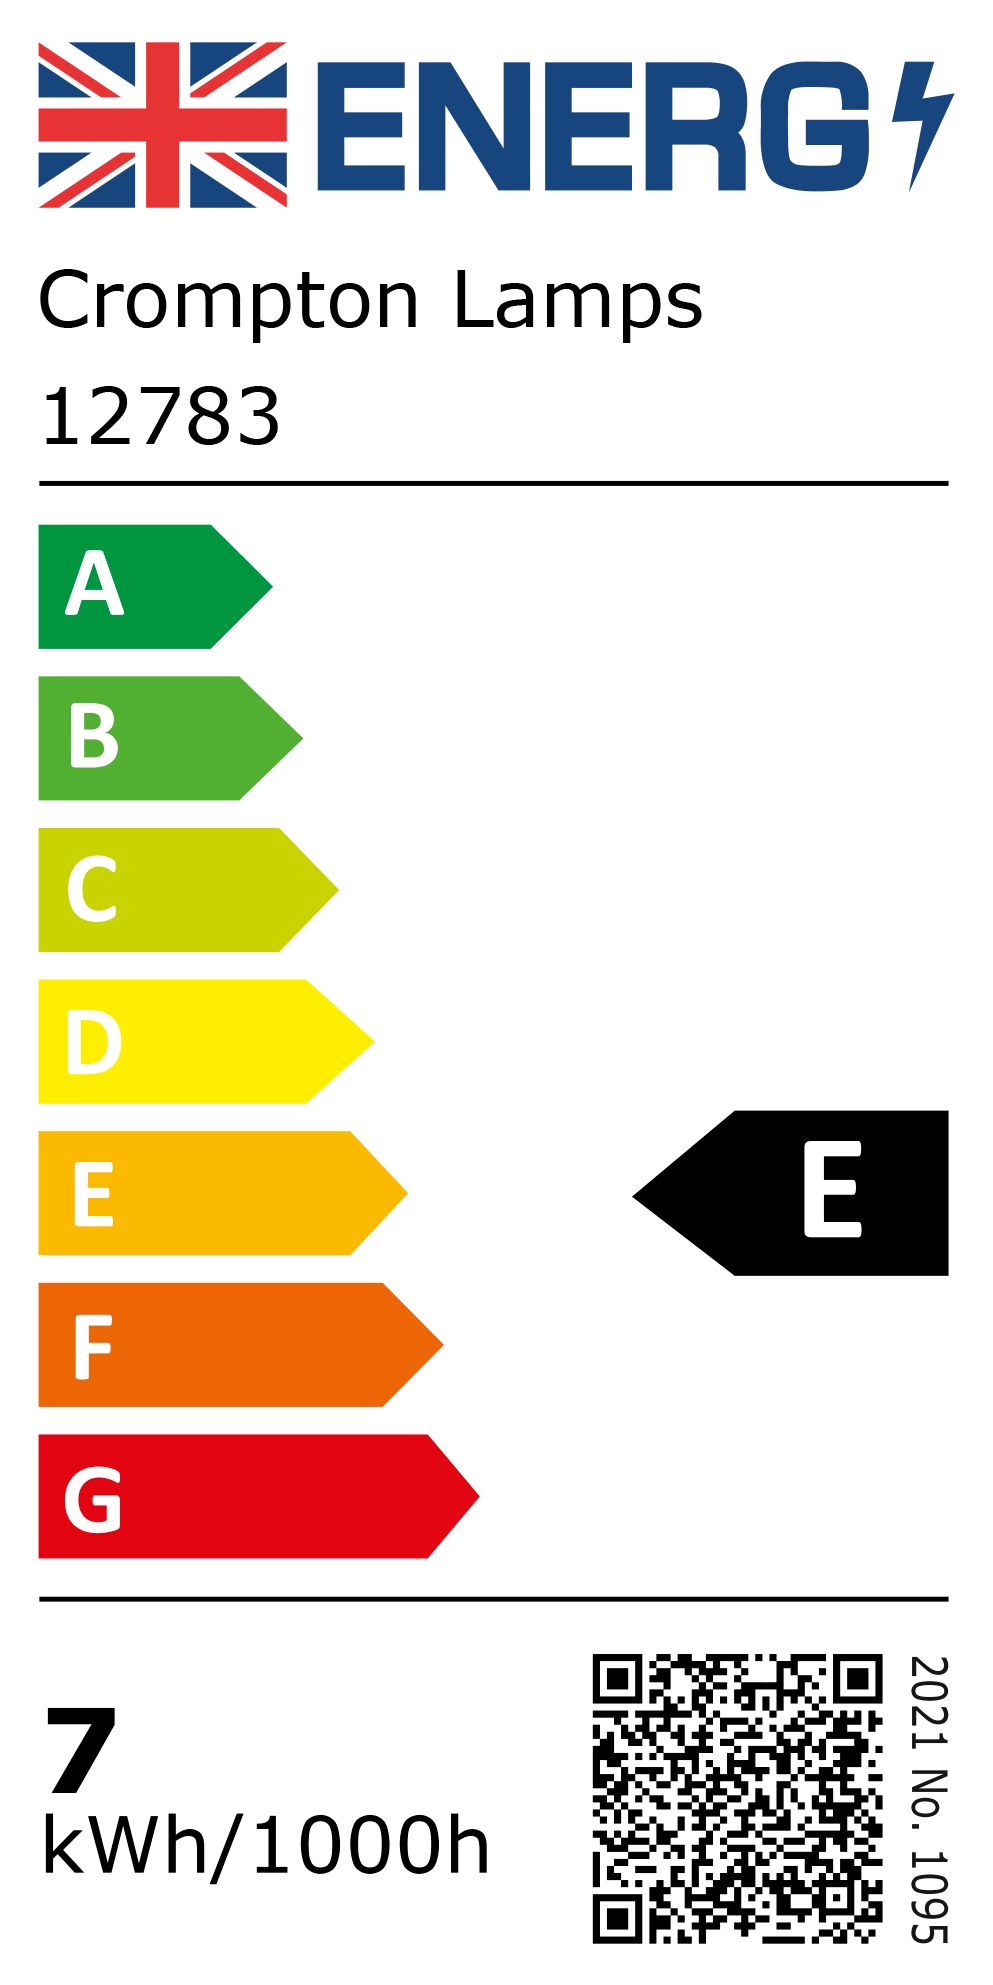 New 2021 Energy Rating Label: Stock Code 12783